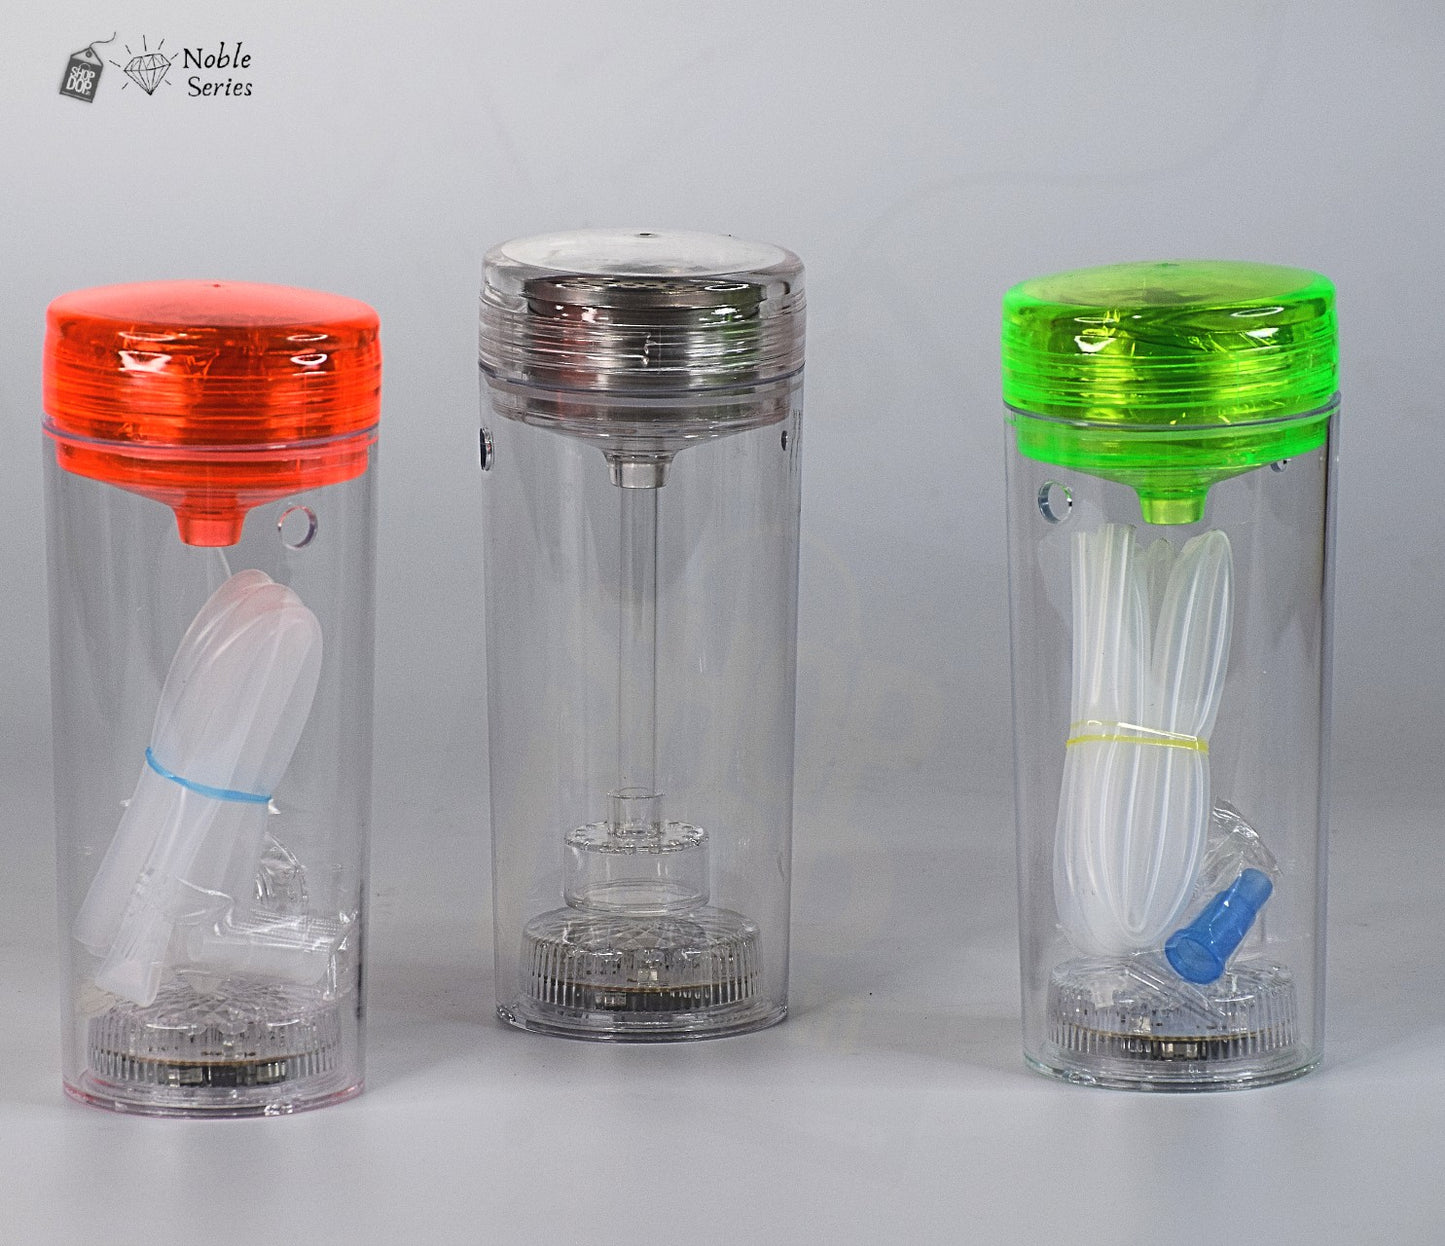 Acrylic Bottle Portable Tumbler Hookah with LED Light - shopdop.in